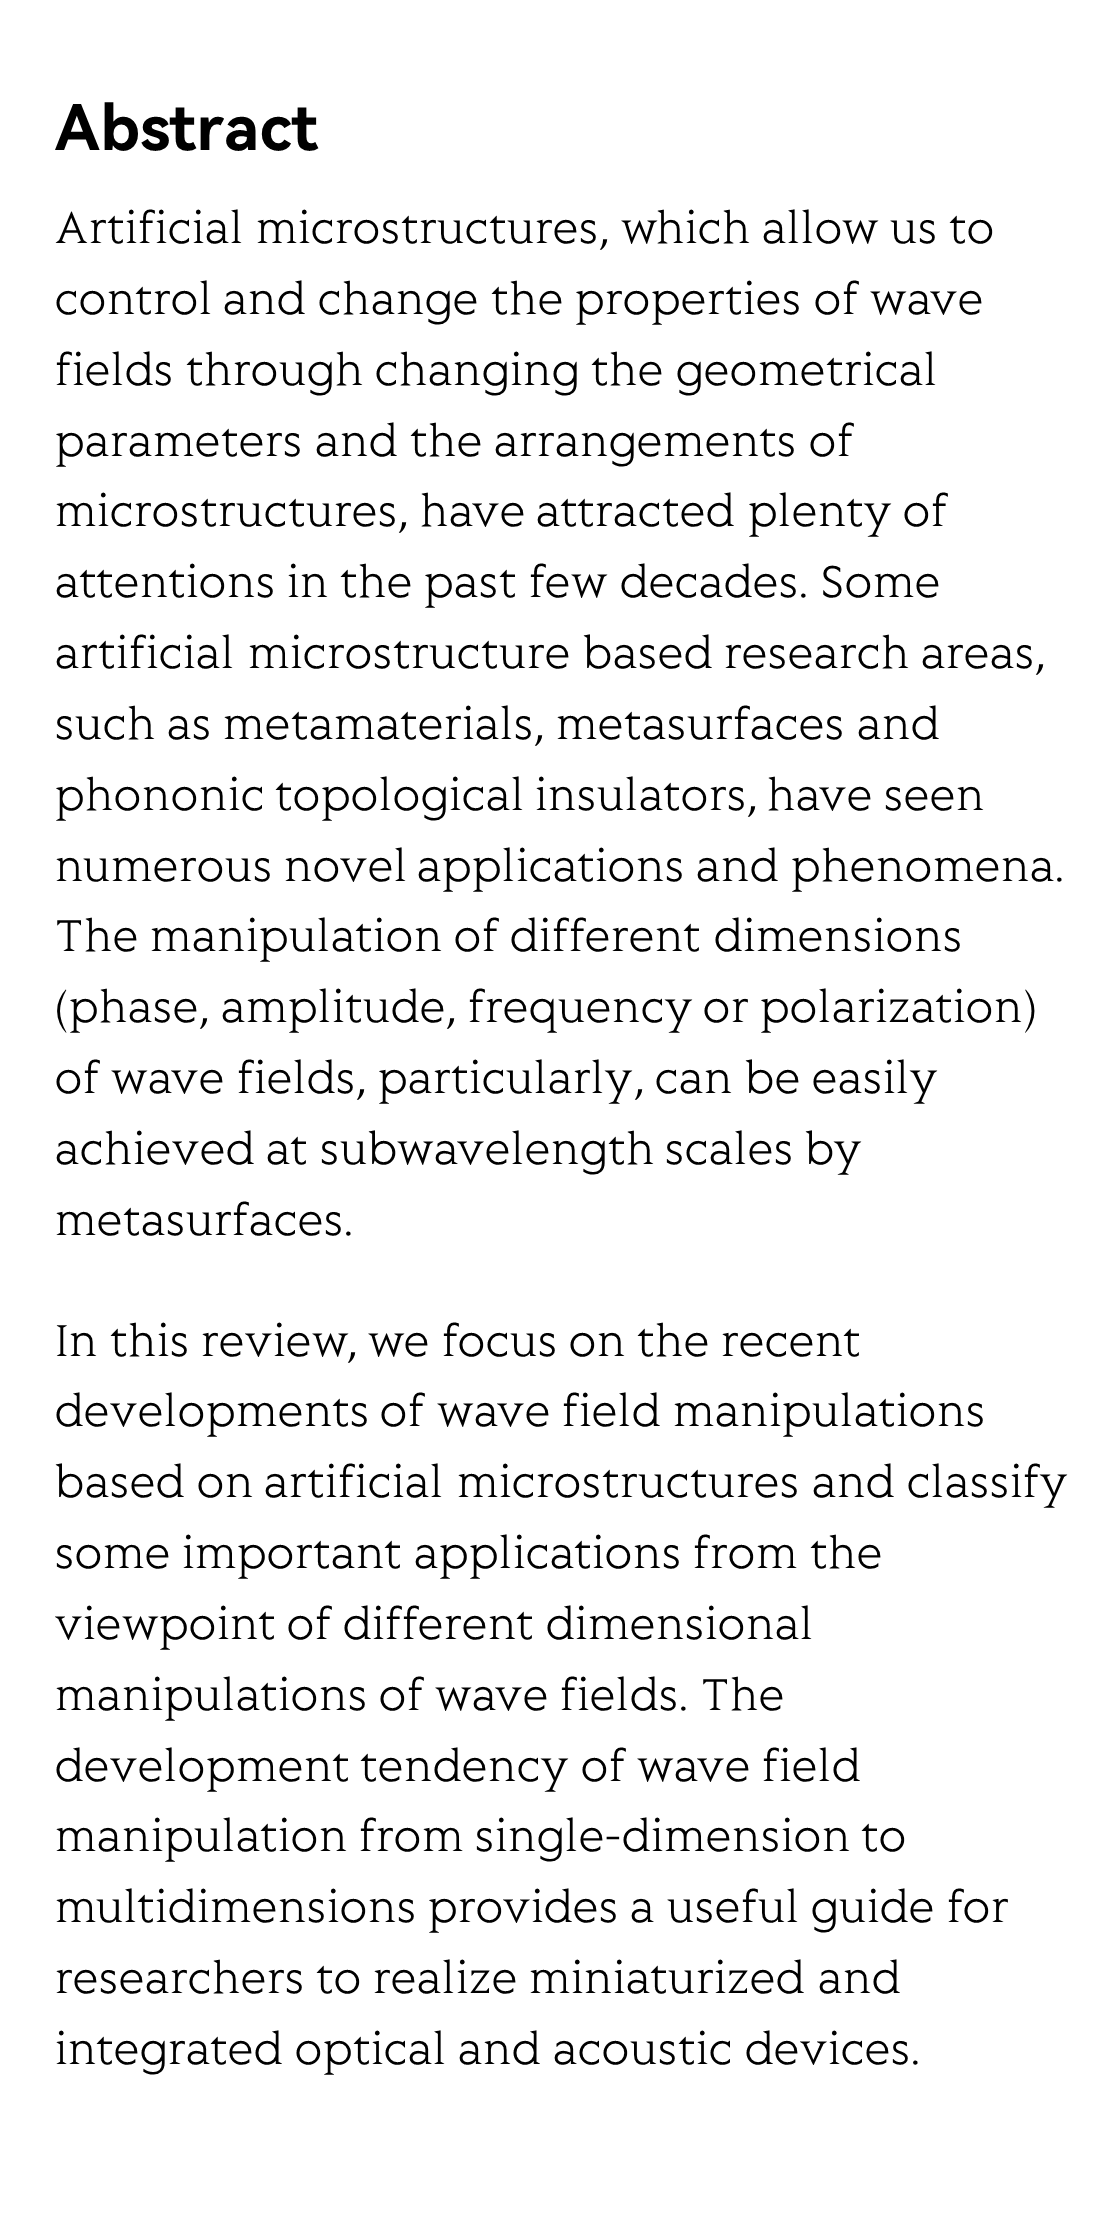 Multidimensional manipulation of wave fields based on artificial microstructures_2